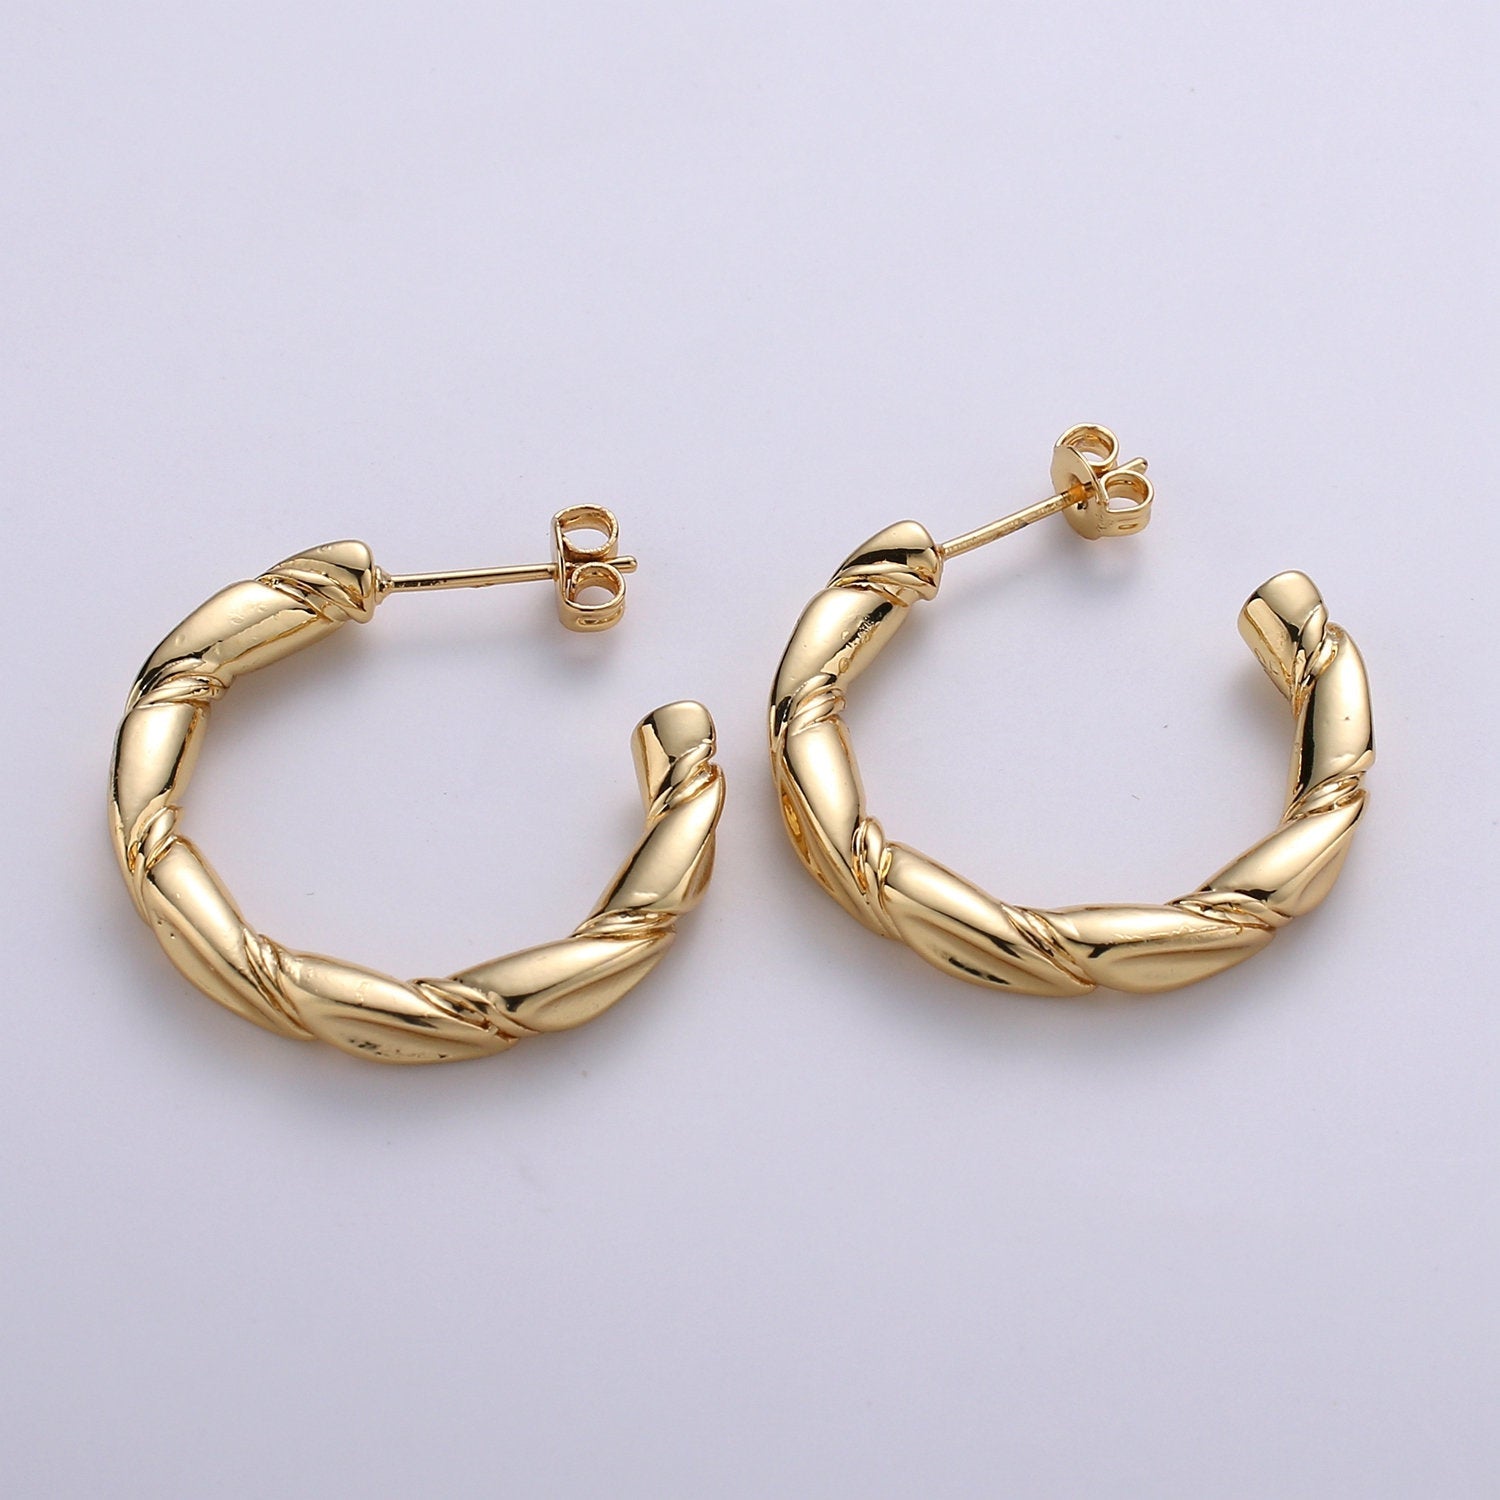 Gold Twisted Hoops, Croissant Hoops, Gold Hoop Earrings, Stud Hoop Earrings, Chunky Hoop Earrings, Thick Hoop Earrings, Bold Hoop Earrings, EARRING-1211 - DLUXCA